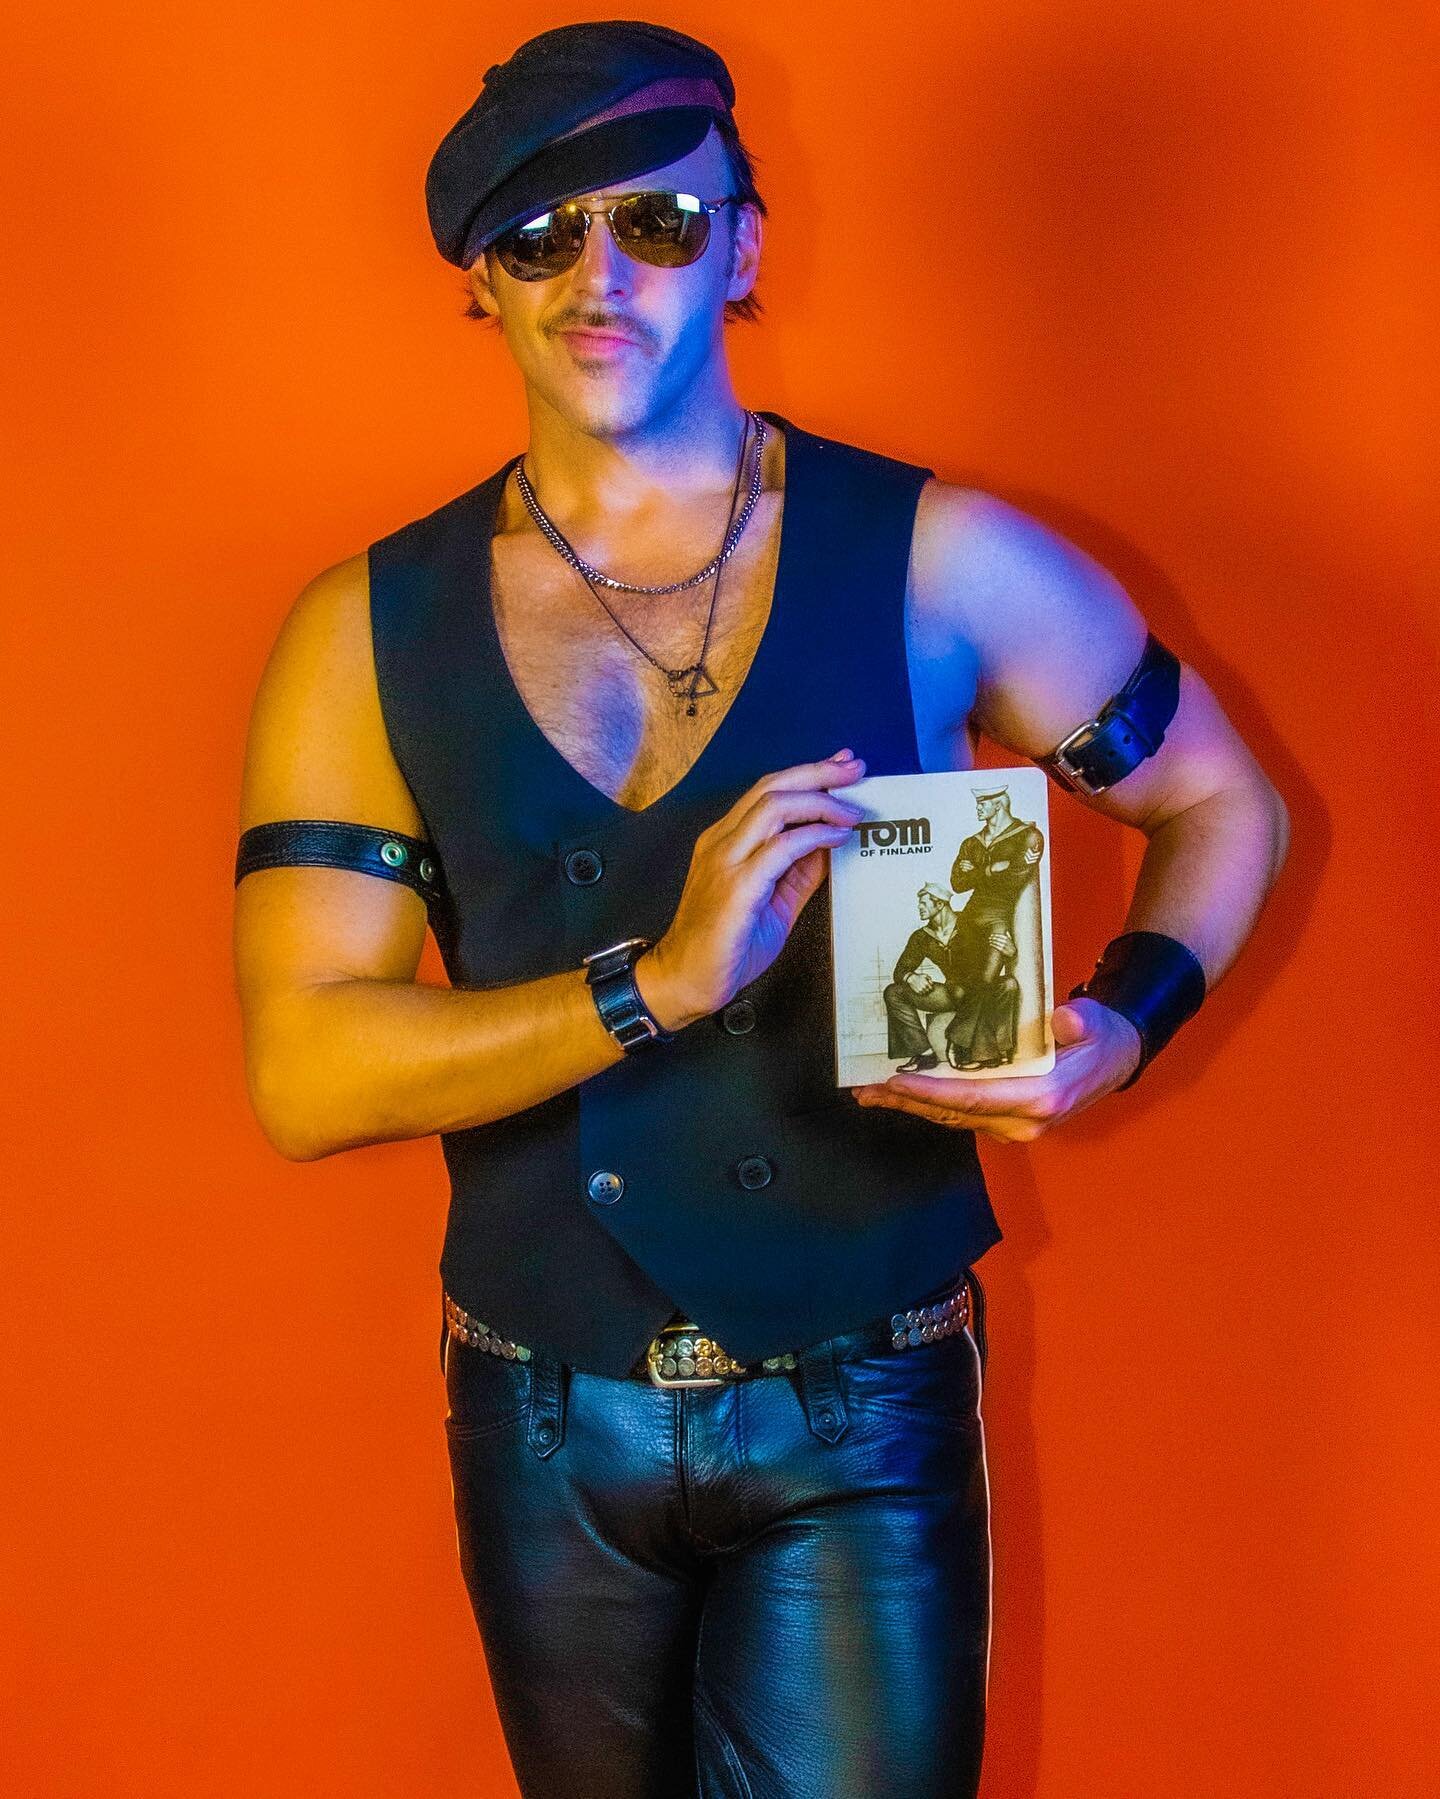 Check out our Tom of Finland journals!  Perfect for everyday note taking and journaling. :). Peachykings.com

#leathermen #queerartist #meninleatherpants #gayleatherfetish